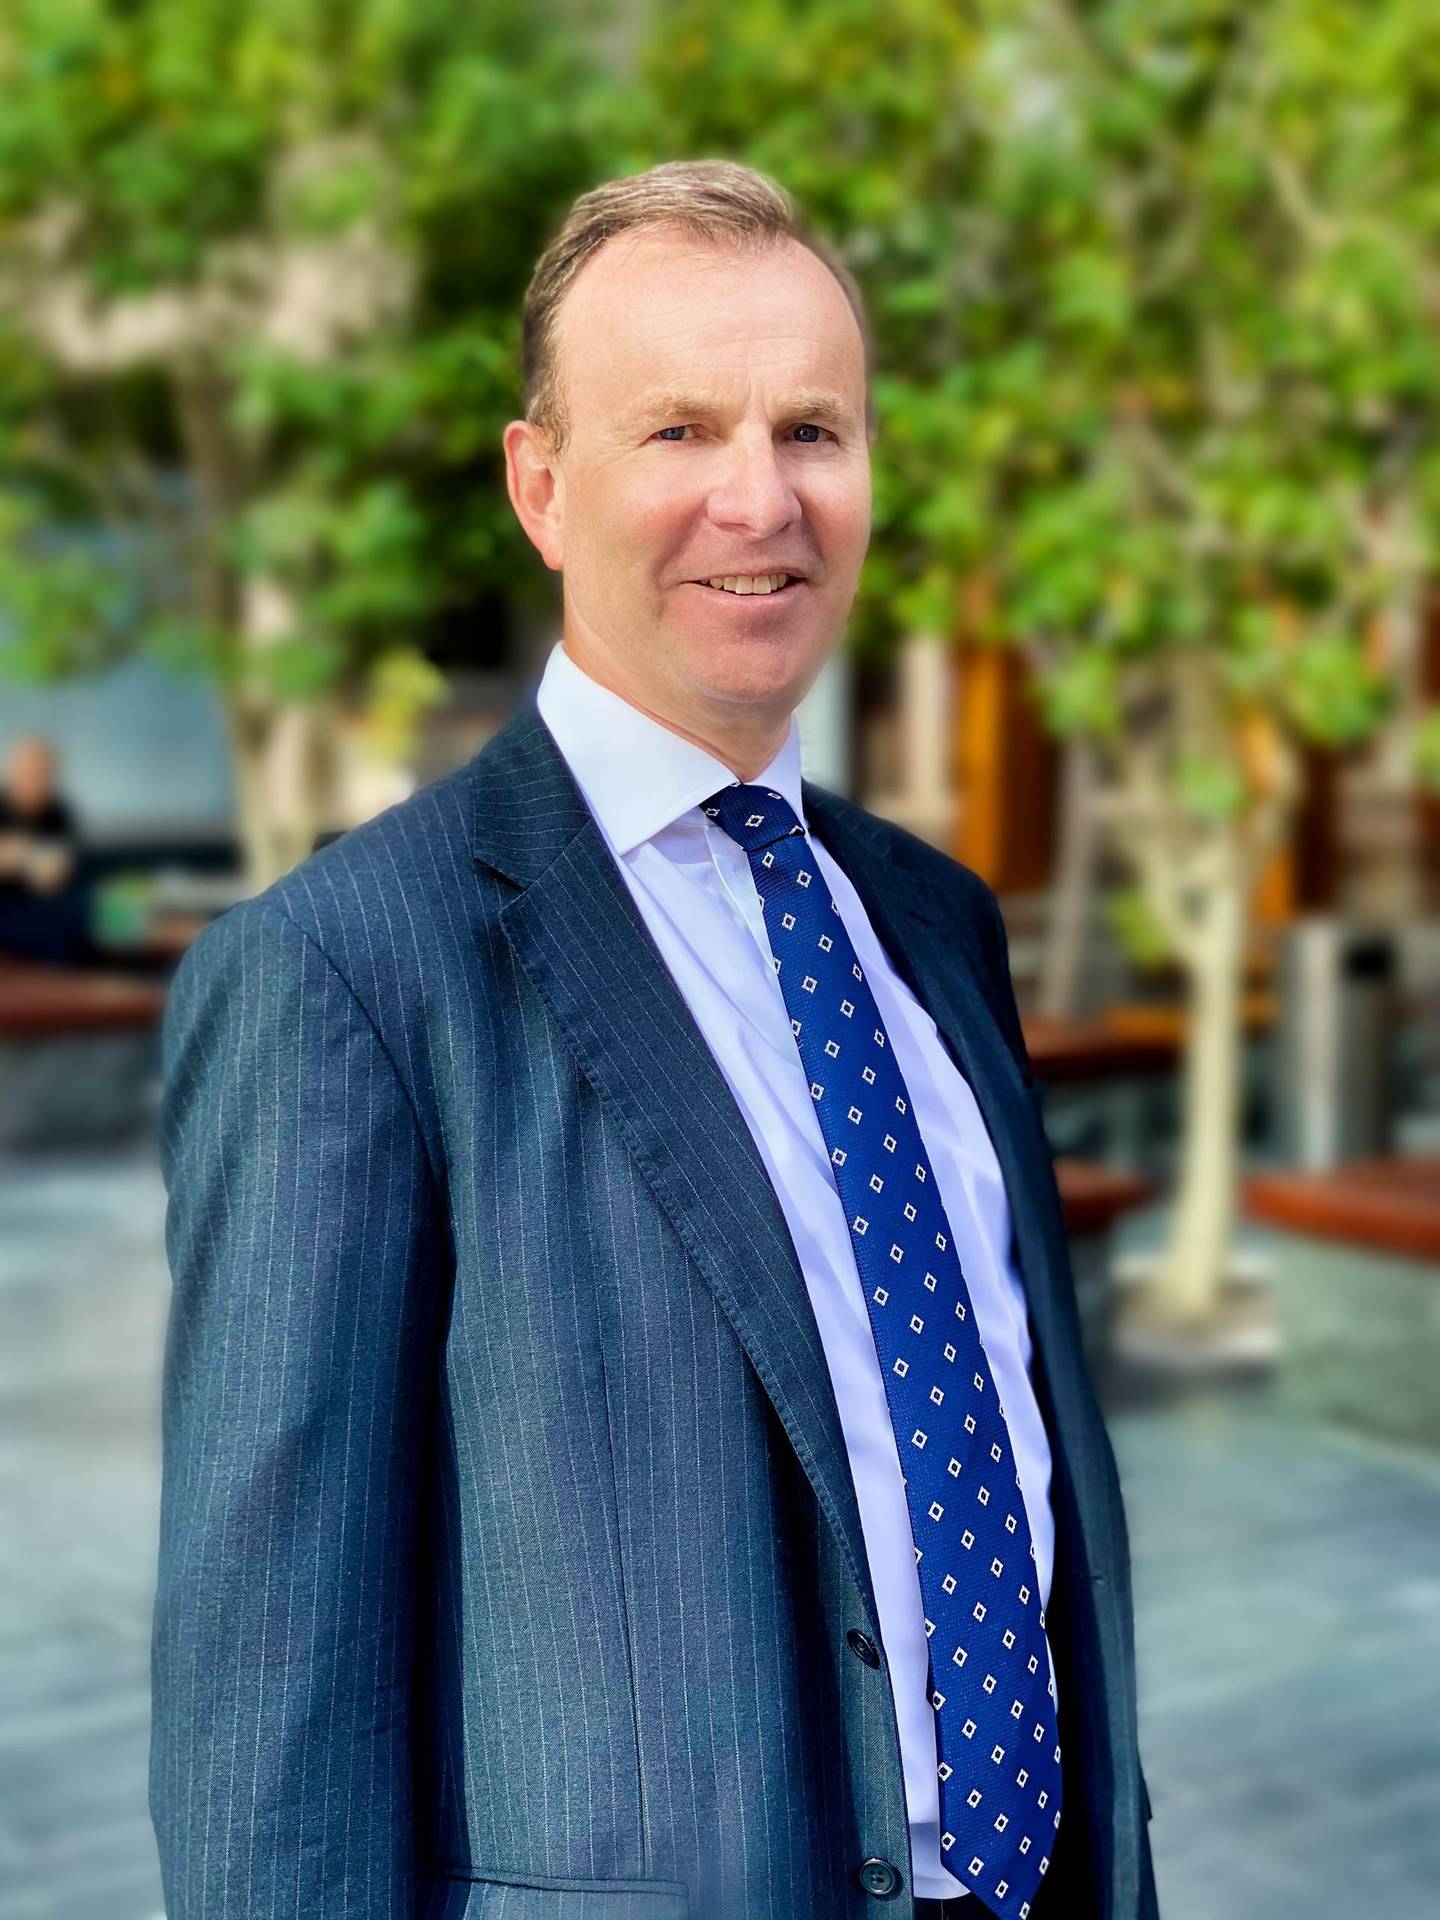 John Benfield of Mercer says the DIFC's new plan comes with both upside and downside returns potential. Photo courtesy Mercer